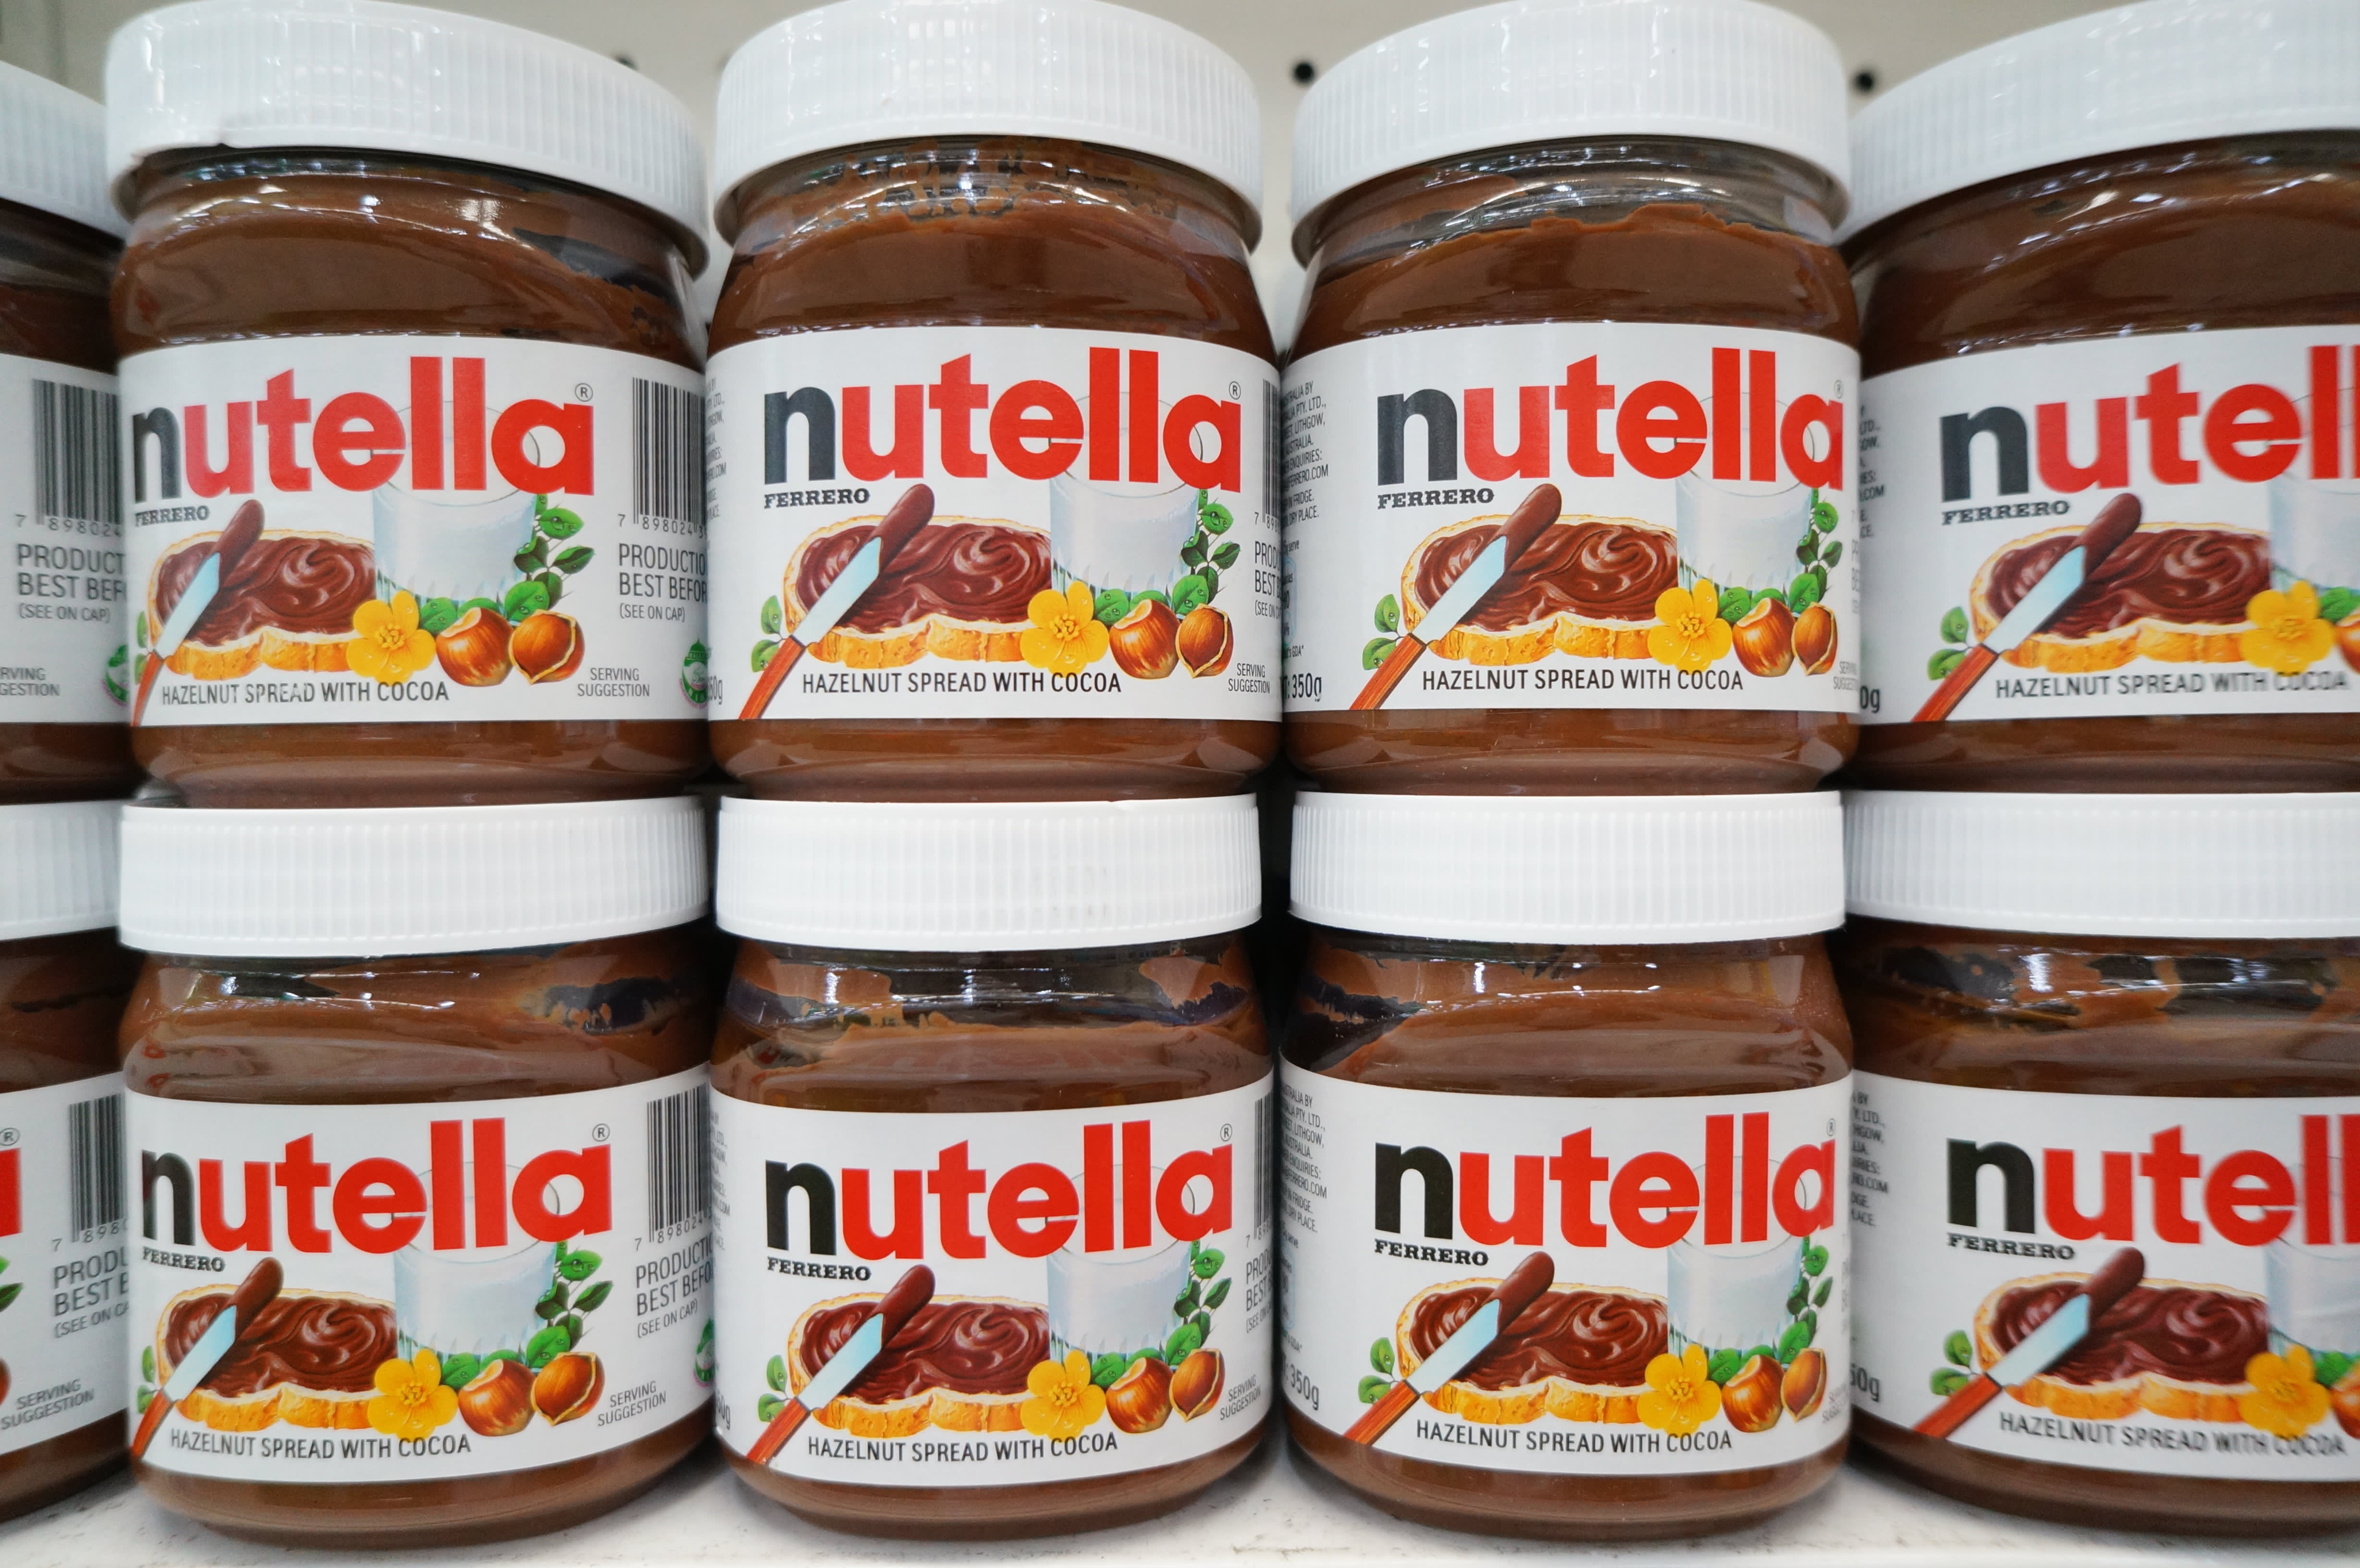 What Is Nutella Made of, Actually?